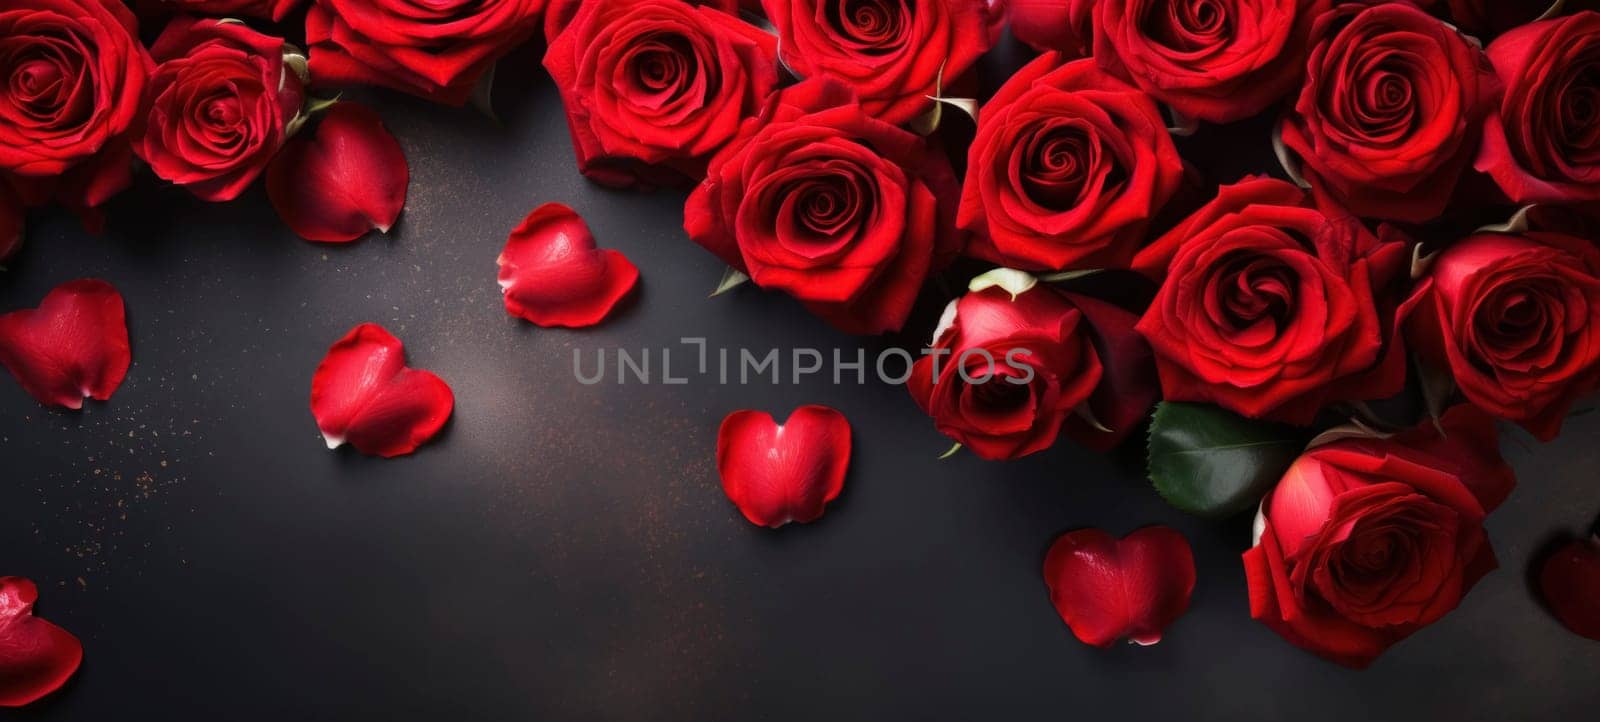 Roses, petals and hearts on a dark background with copy space. Valentine's Day background.